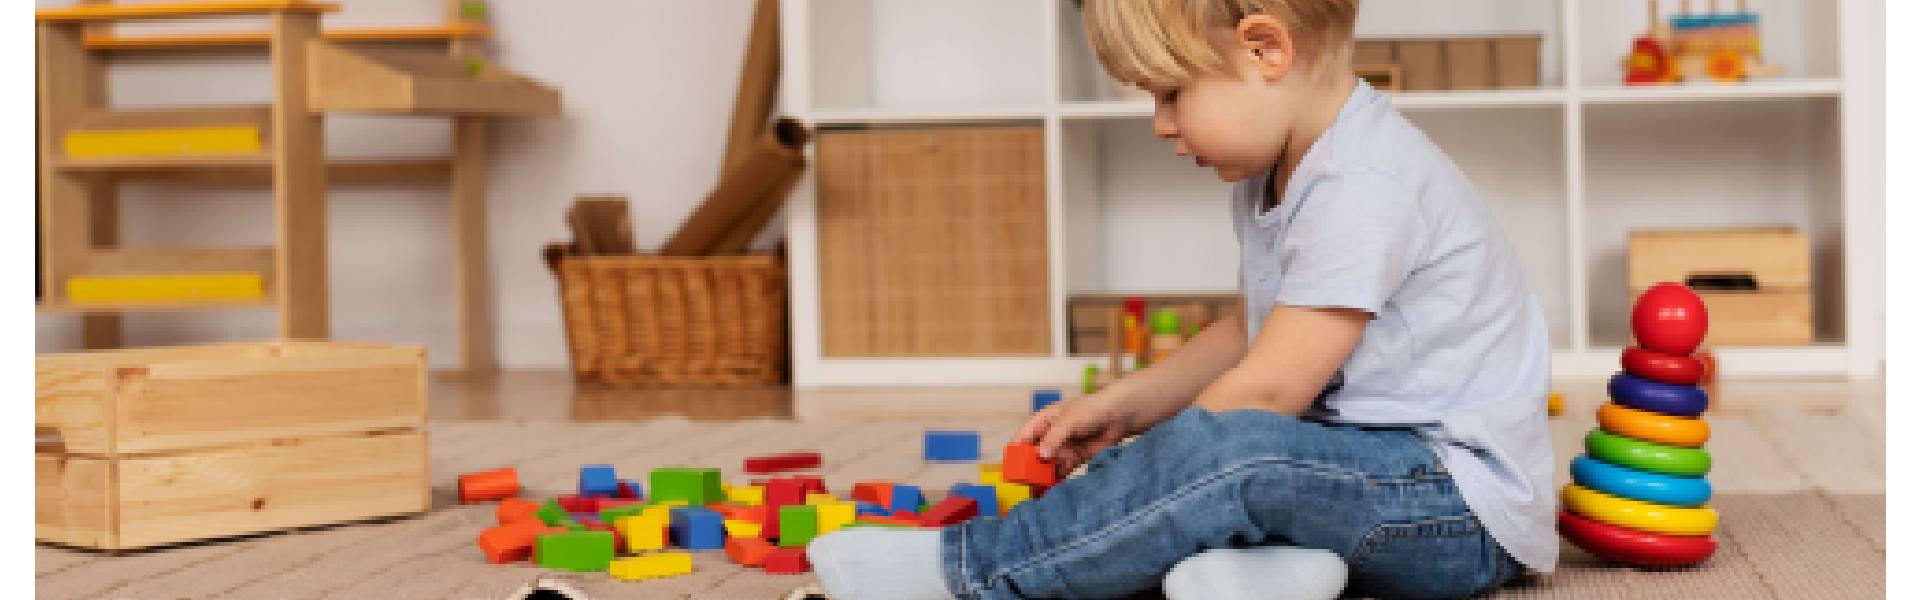 a-boy-playing-with-kids-building-block-and-other-indoor-toys